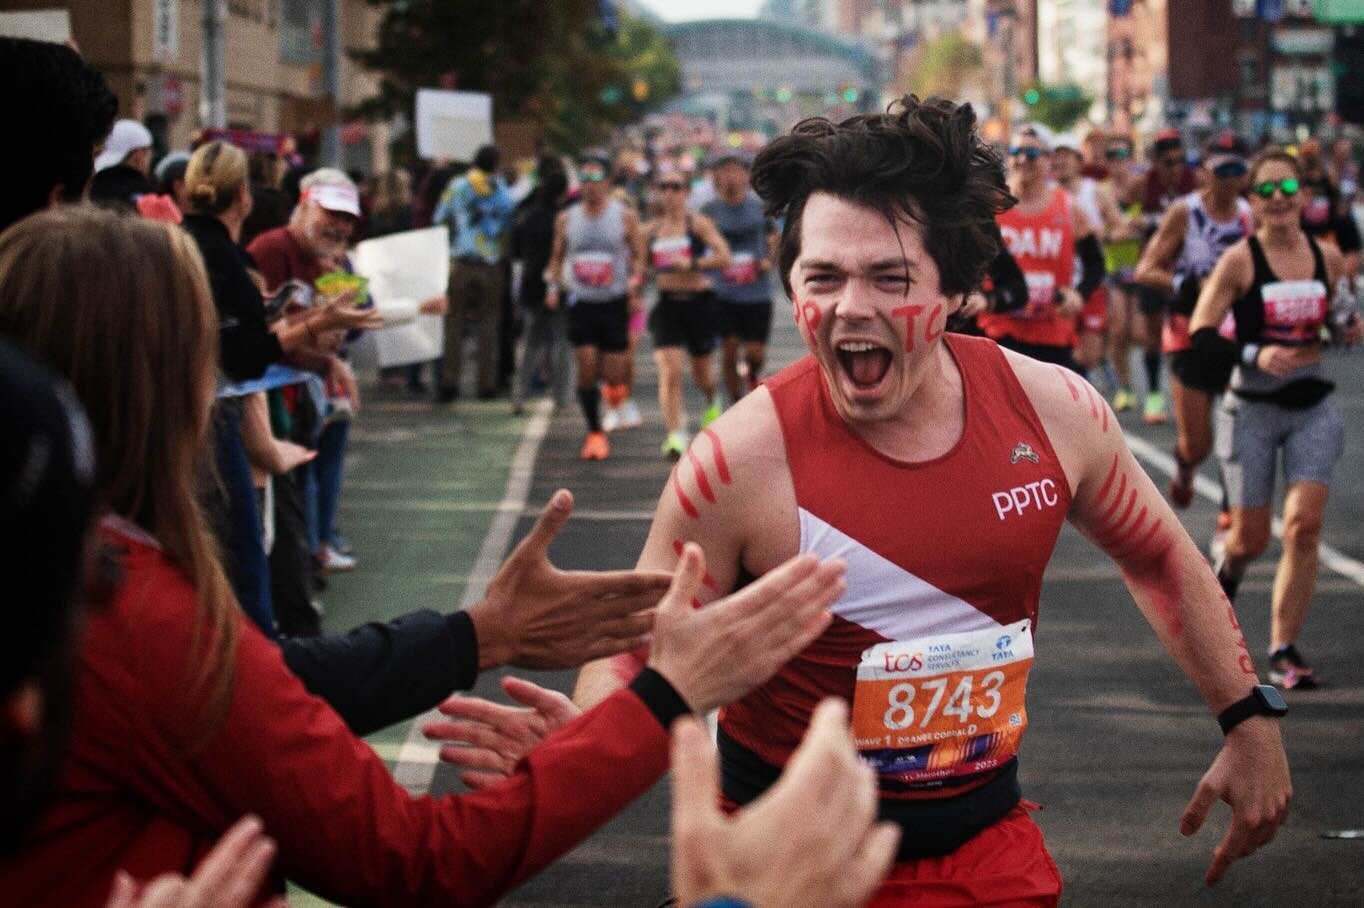 Congratulations to the winners of the first annual photography contest!

Category: Team Spirit
Winner: &ldquo;PPTC Cheer Station at the NYC Marathon&rdquo;, Marek Stępniowski

Category: Best/Worst Race Face
Winner: &ldquo;Runner less than 2 miles to 